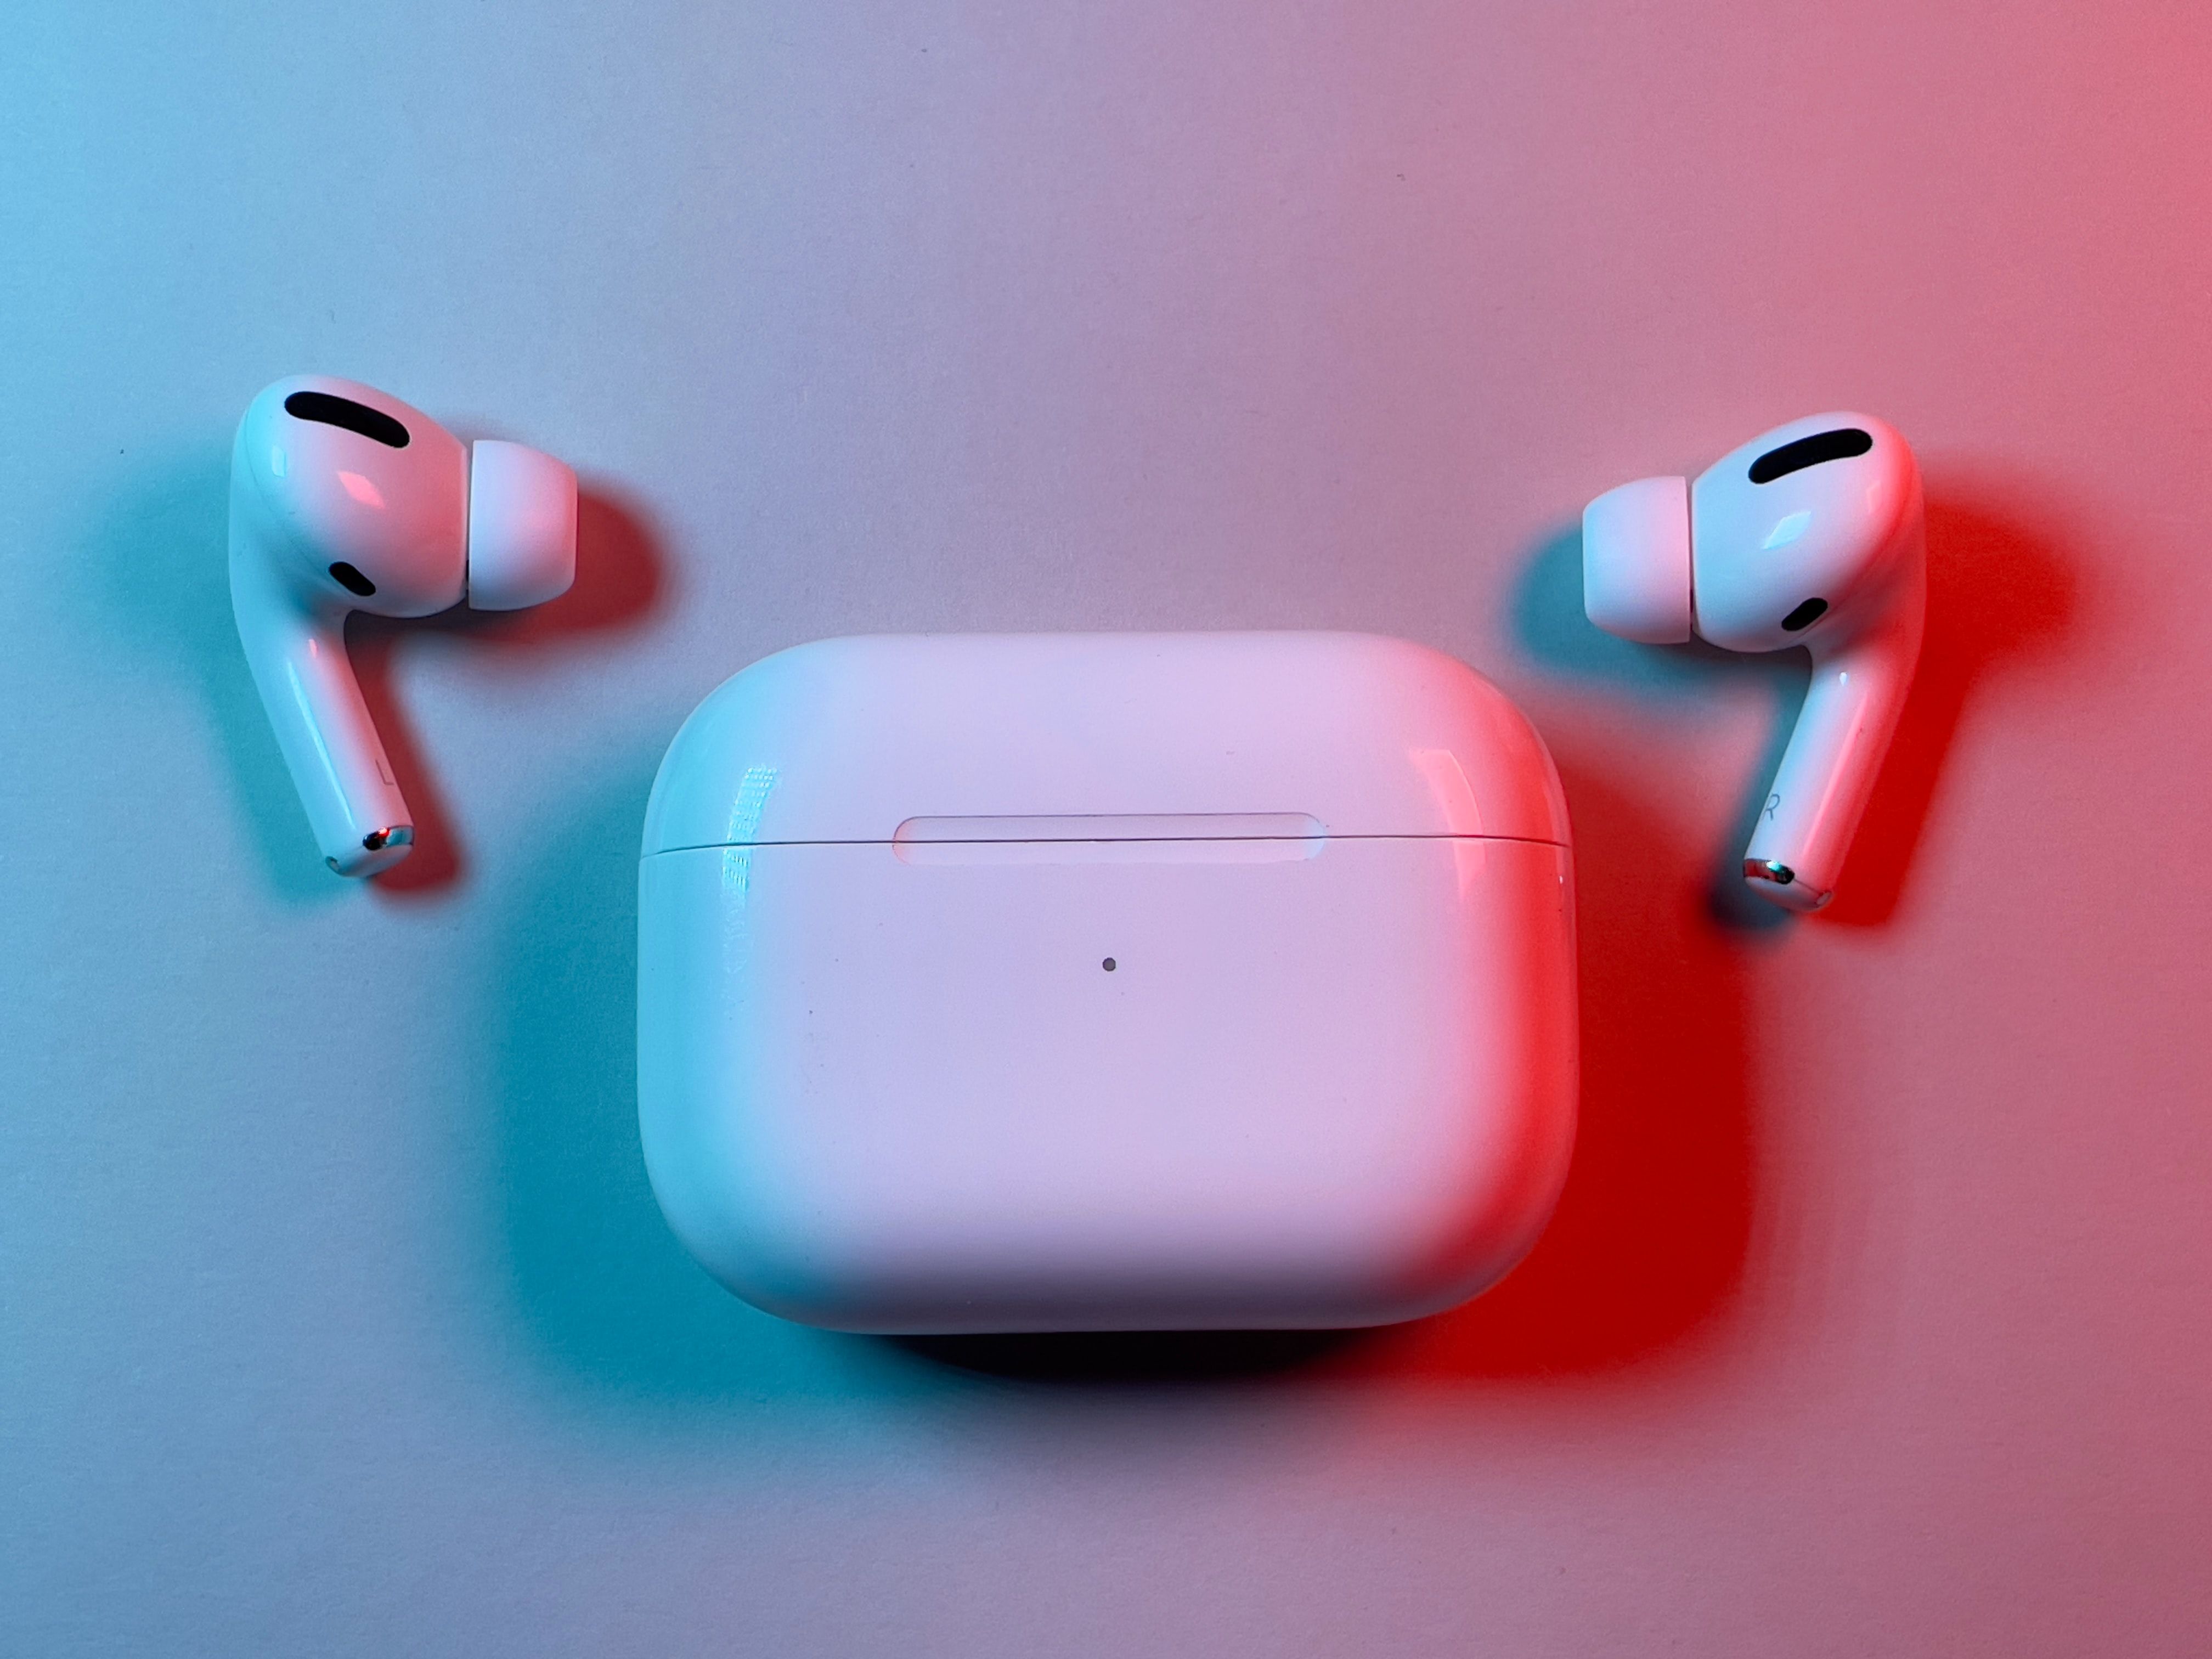 How to Connect AirPods to an Android Phone